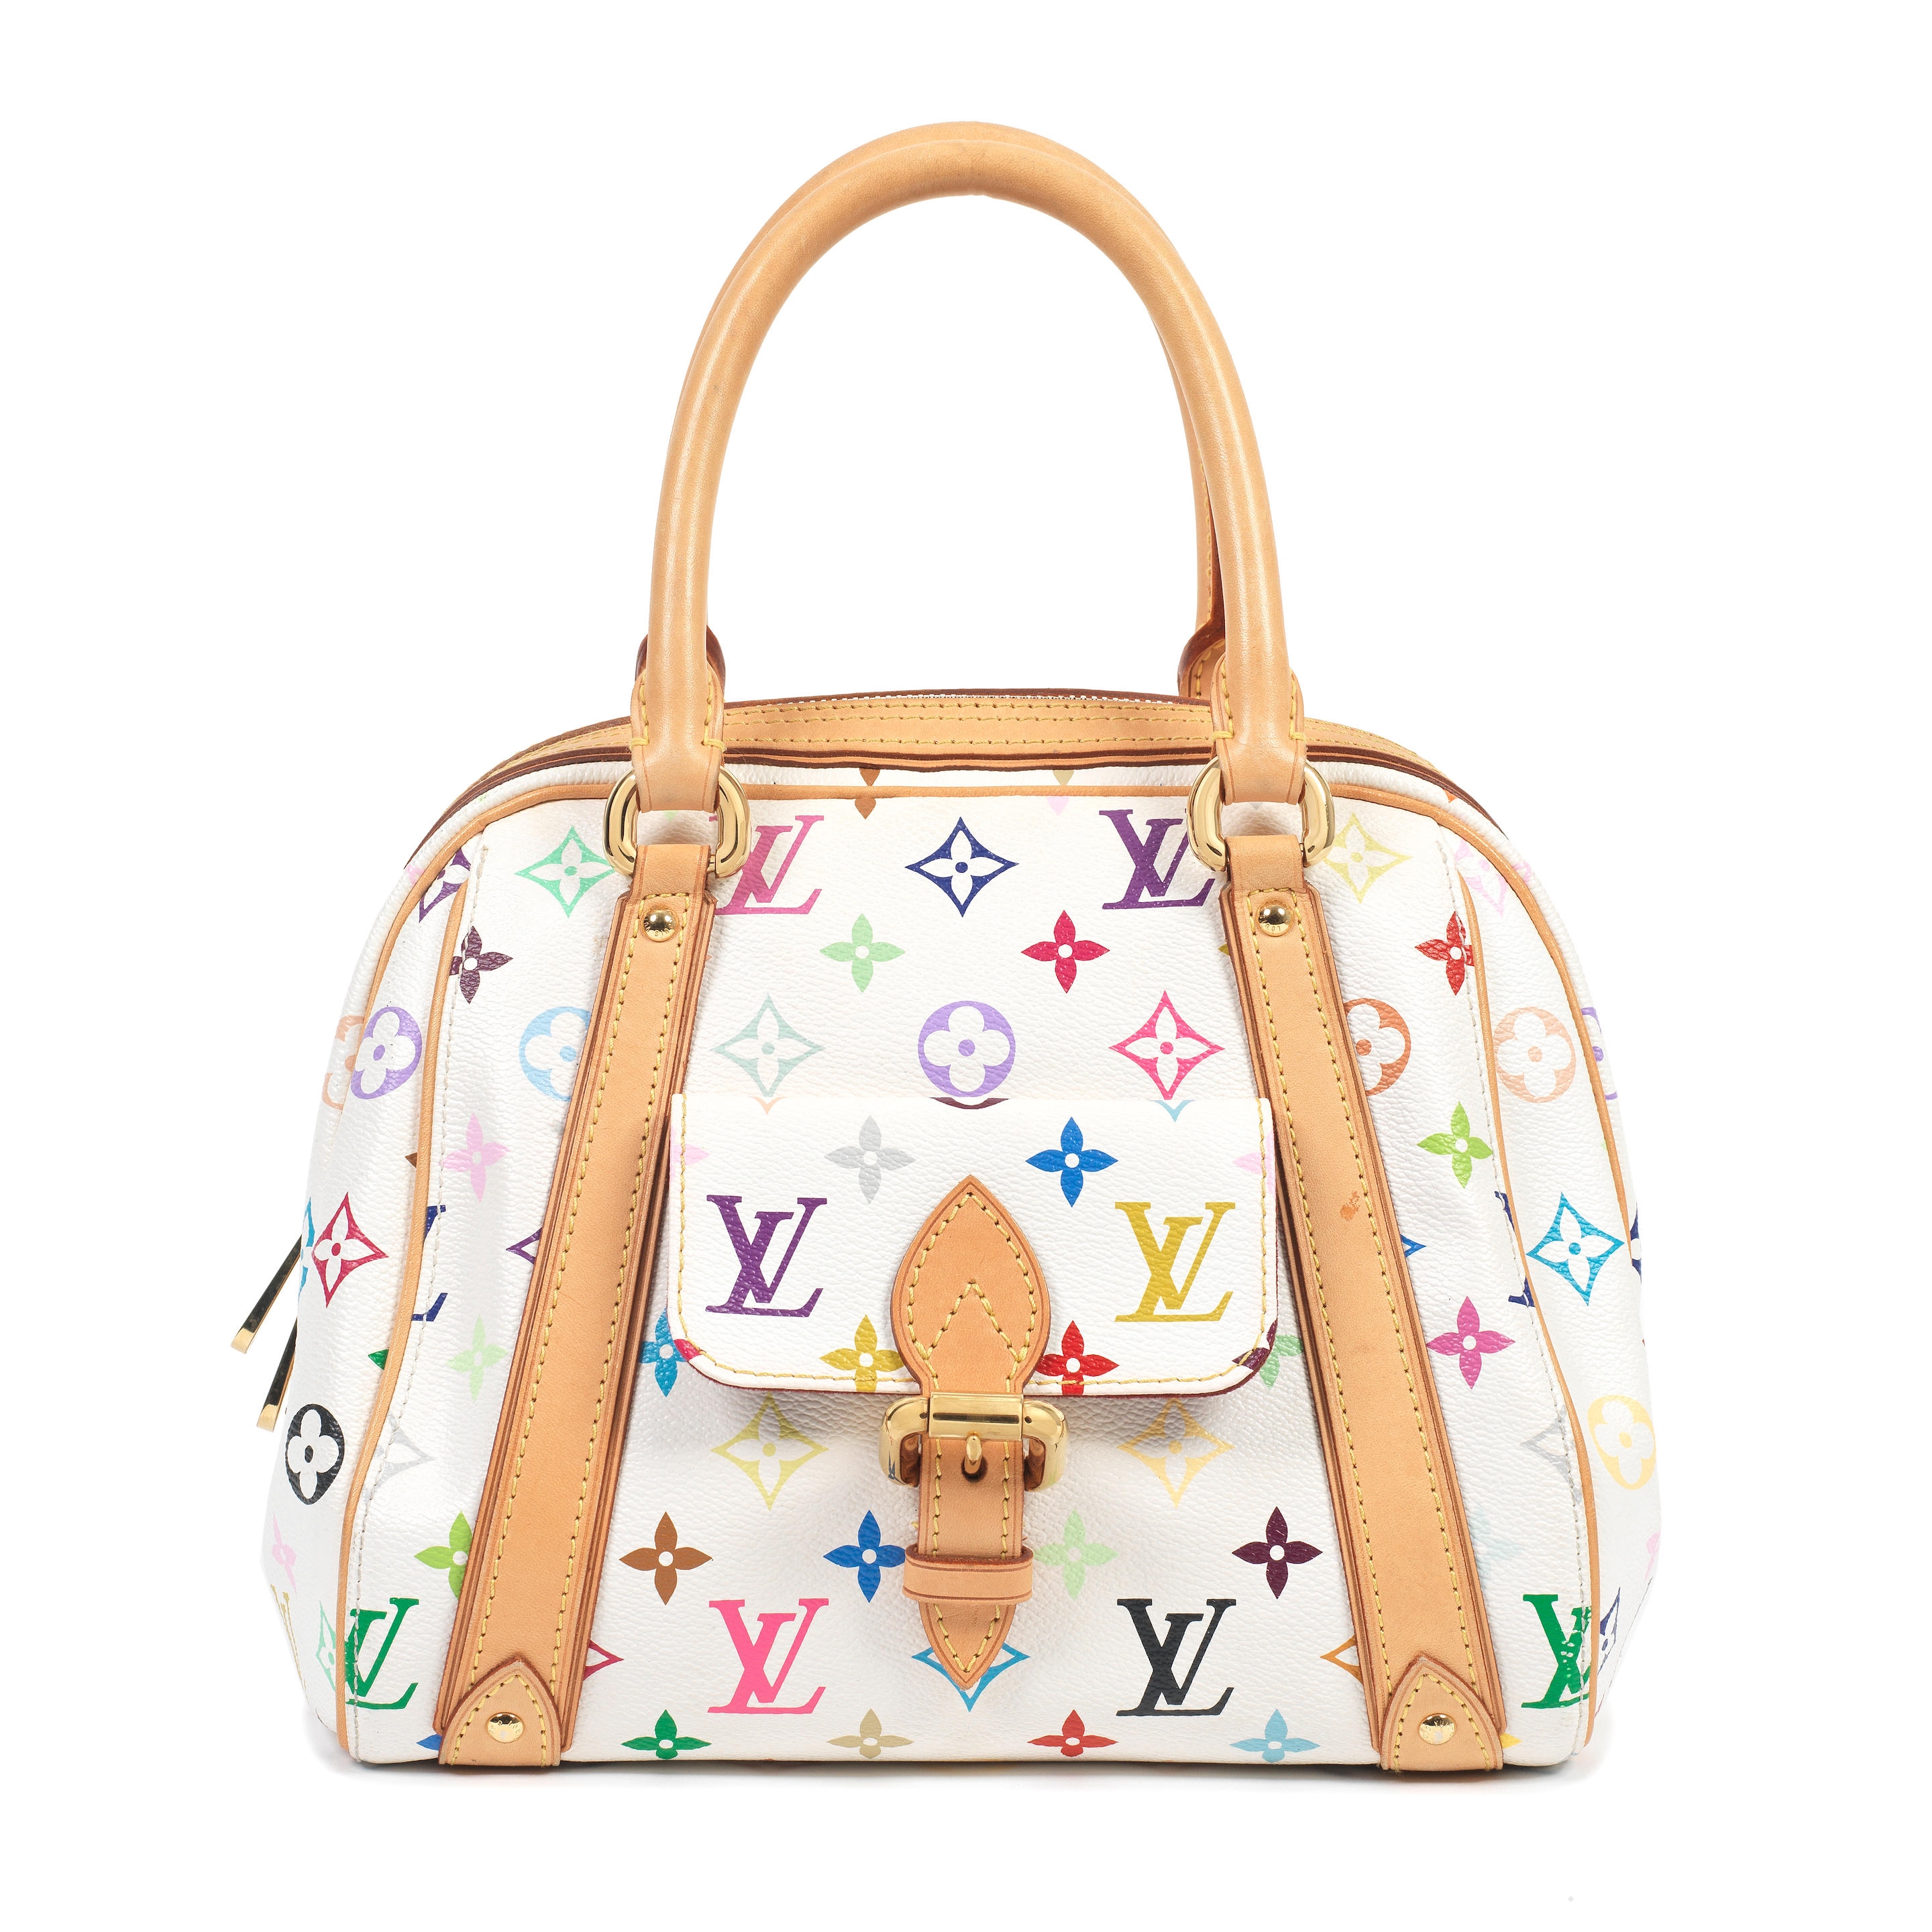 Sold at Auction: Louis Vuitton White Multicolore Monogram Keepall